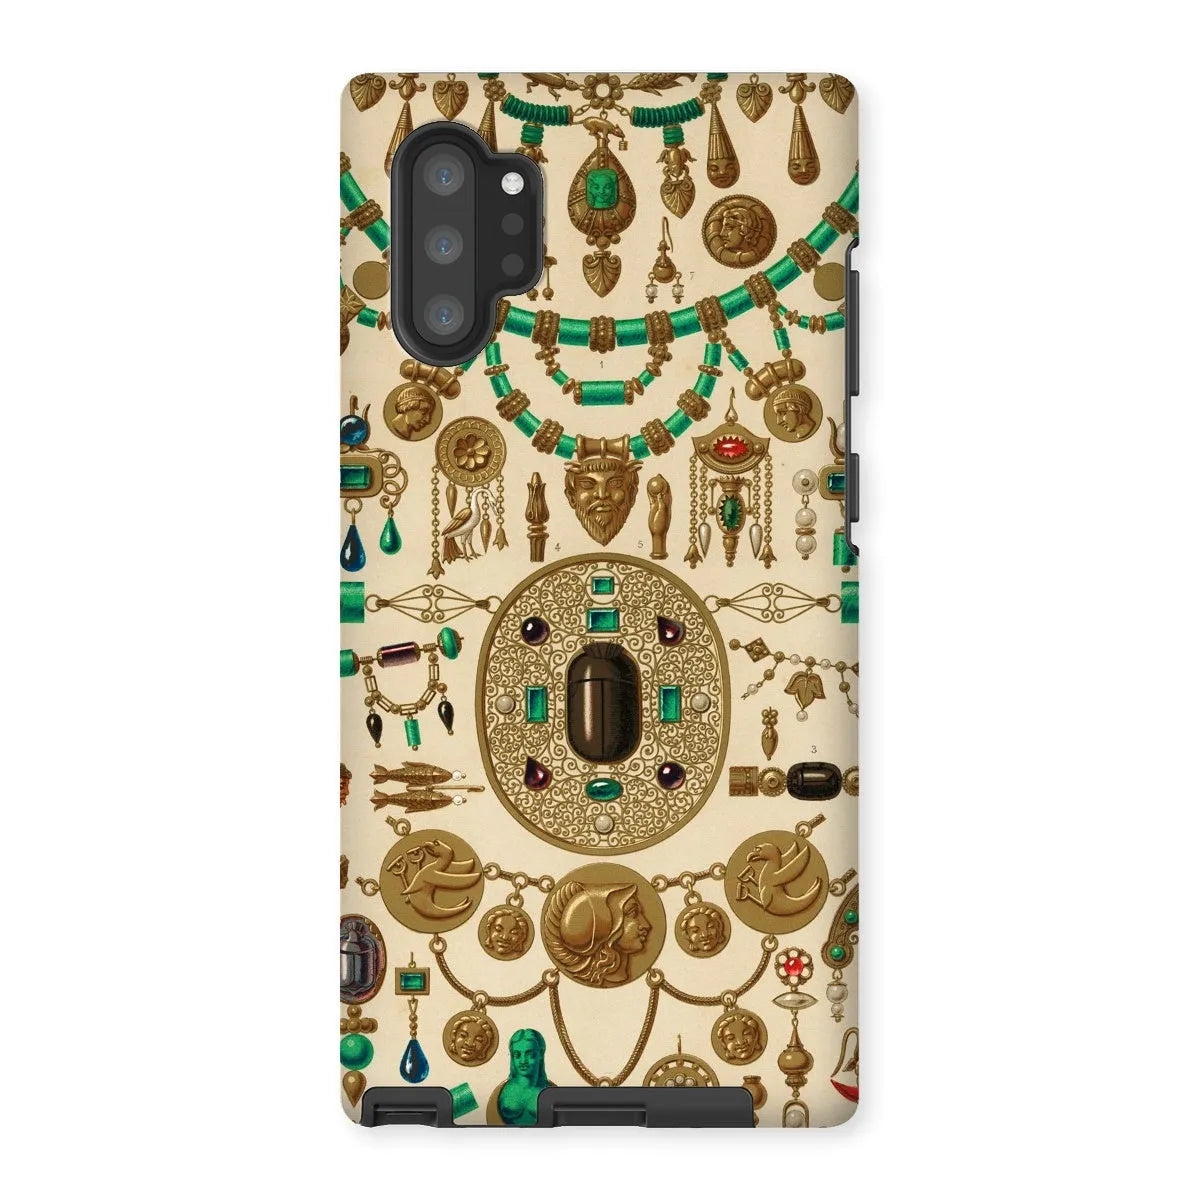 Etruscan Patterns From L’ornement Polychrome By Auguste Racinet Tough Phone Case - Samsung Galaxy Note 10p / Matte